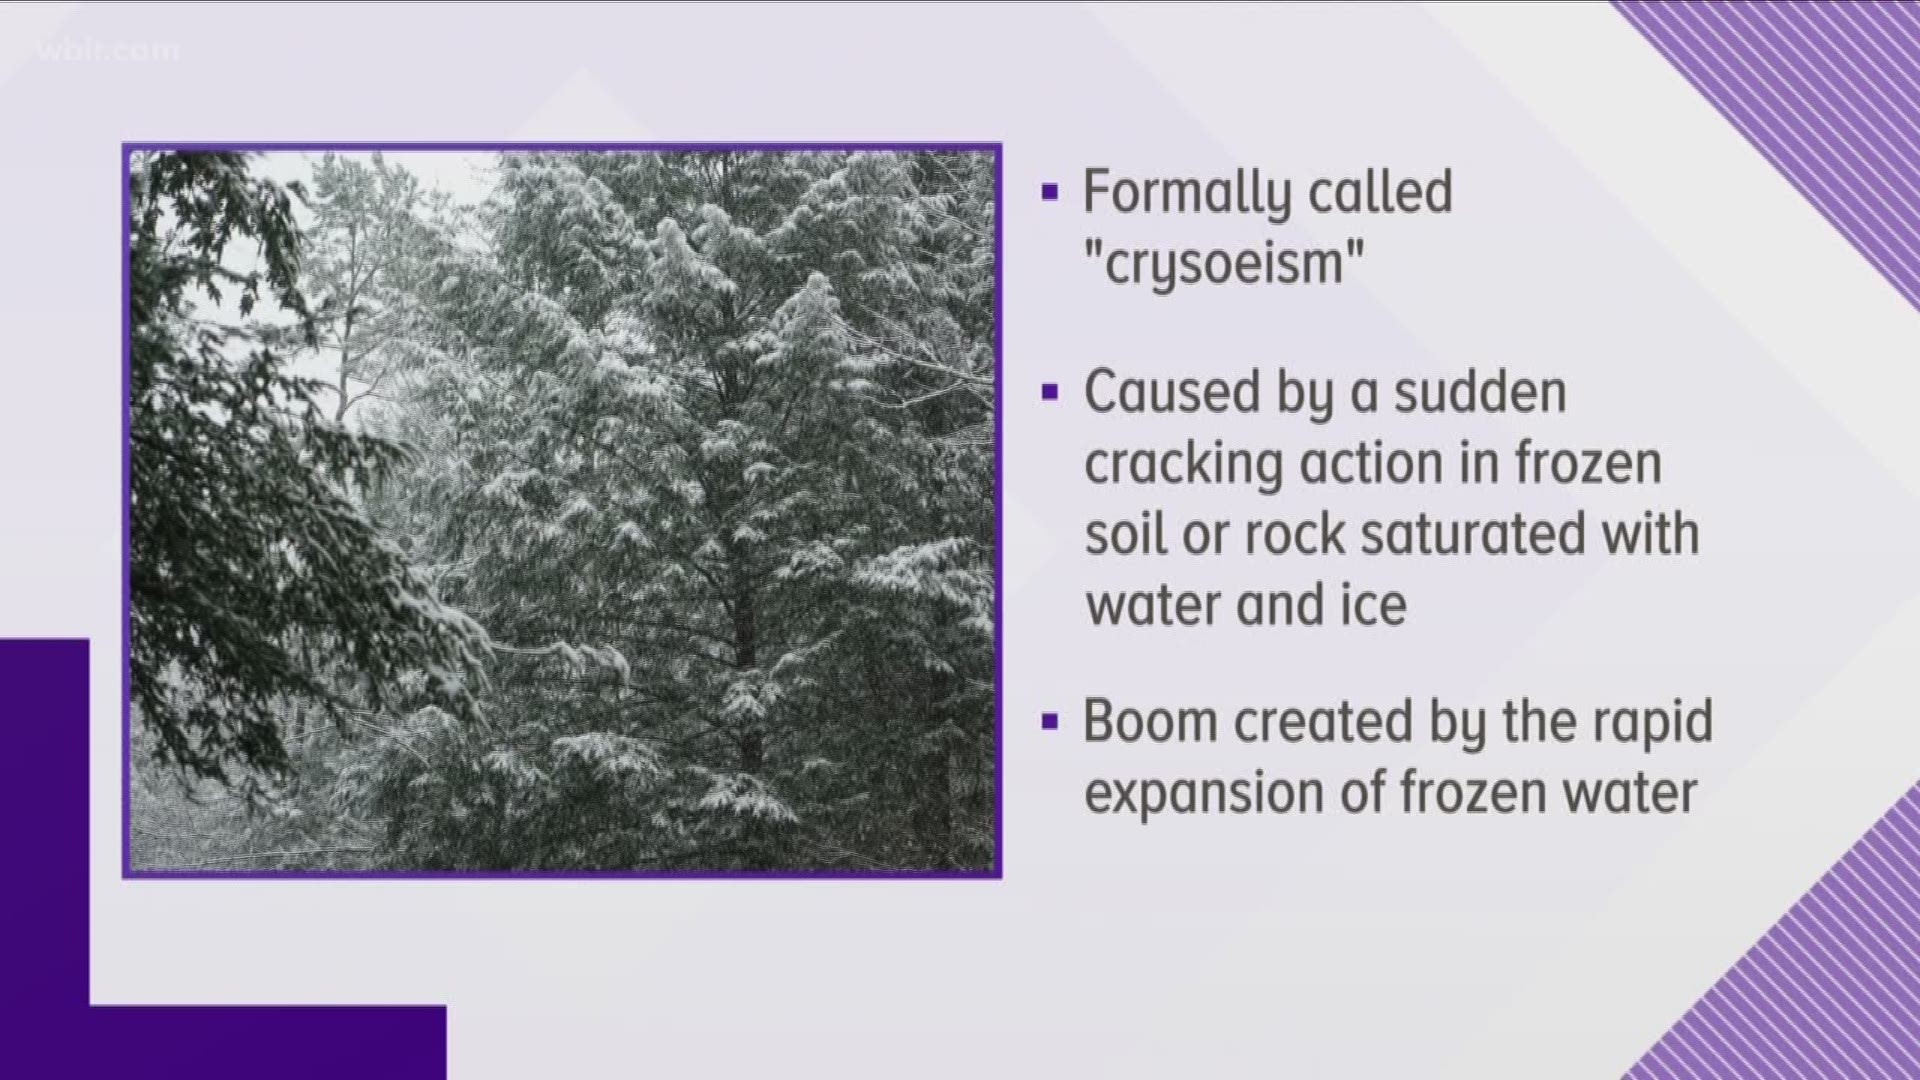 Several people in East Tenn. have reported hearing frost quakes, formally called a cryoseism. They are 	caused by a sudden cracking action in frozen soil or rock saturated with water and ice. The booming sound is created by the rapid expansion of frozen water.